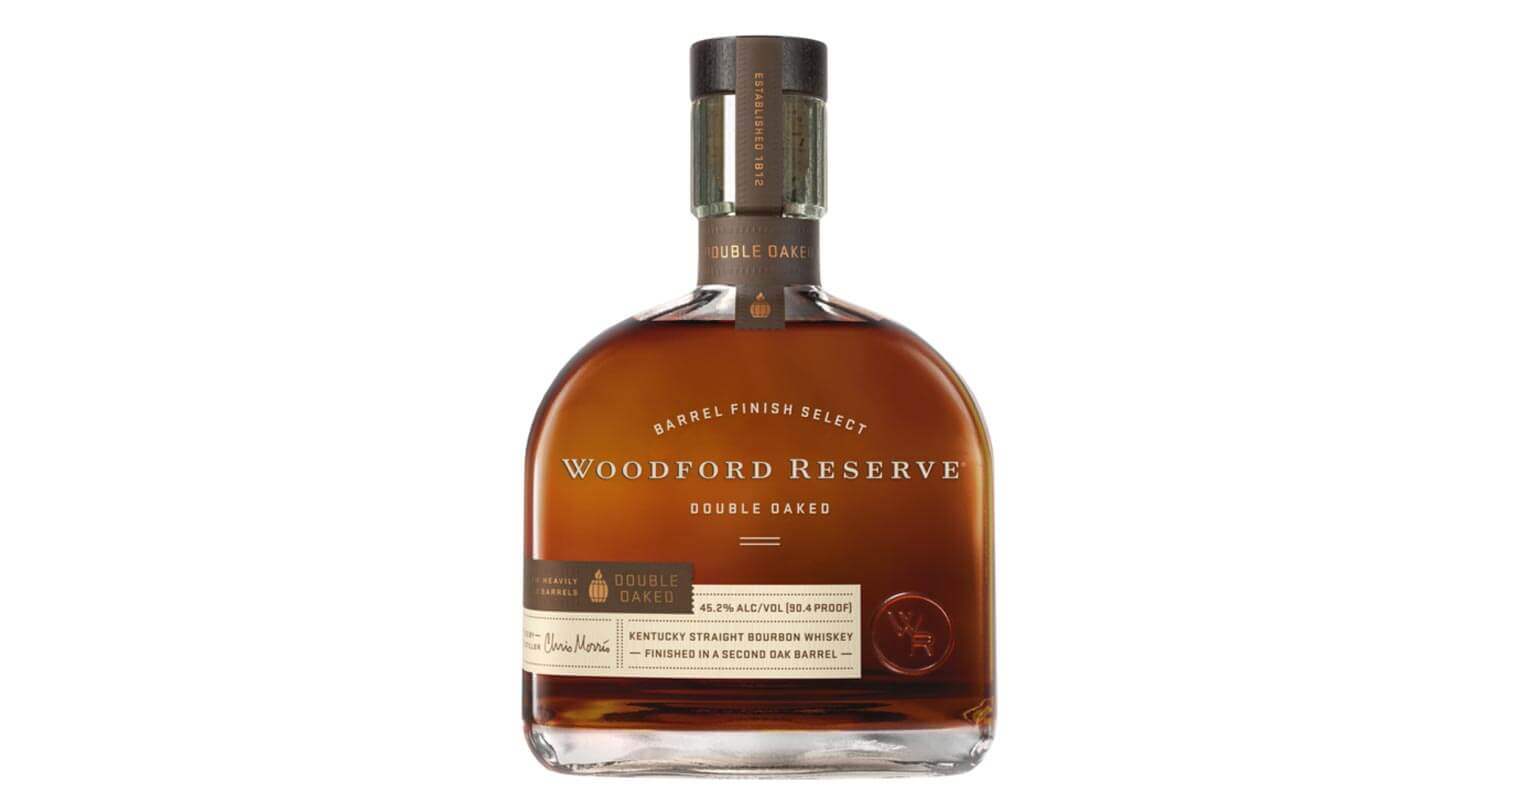 Woodford Reserve Introduces New Package Redesign, featured image